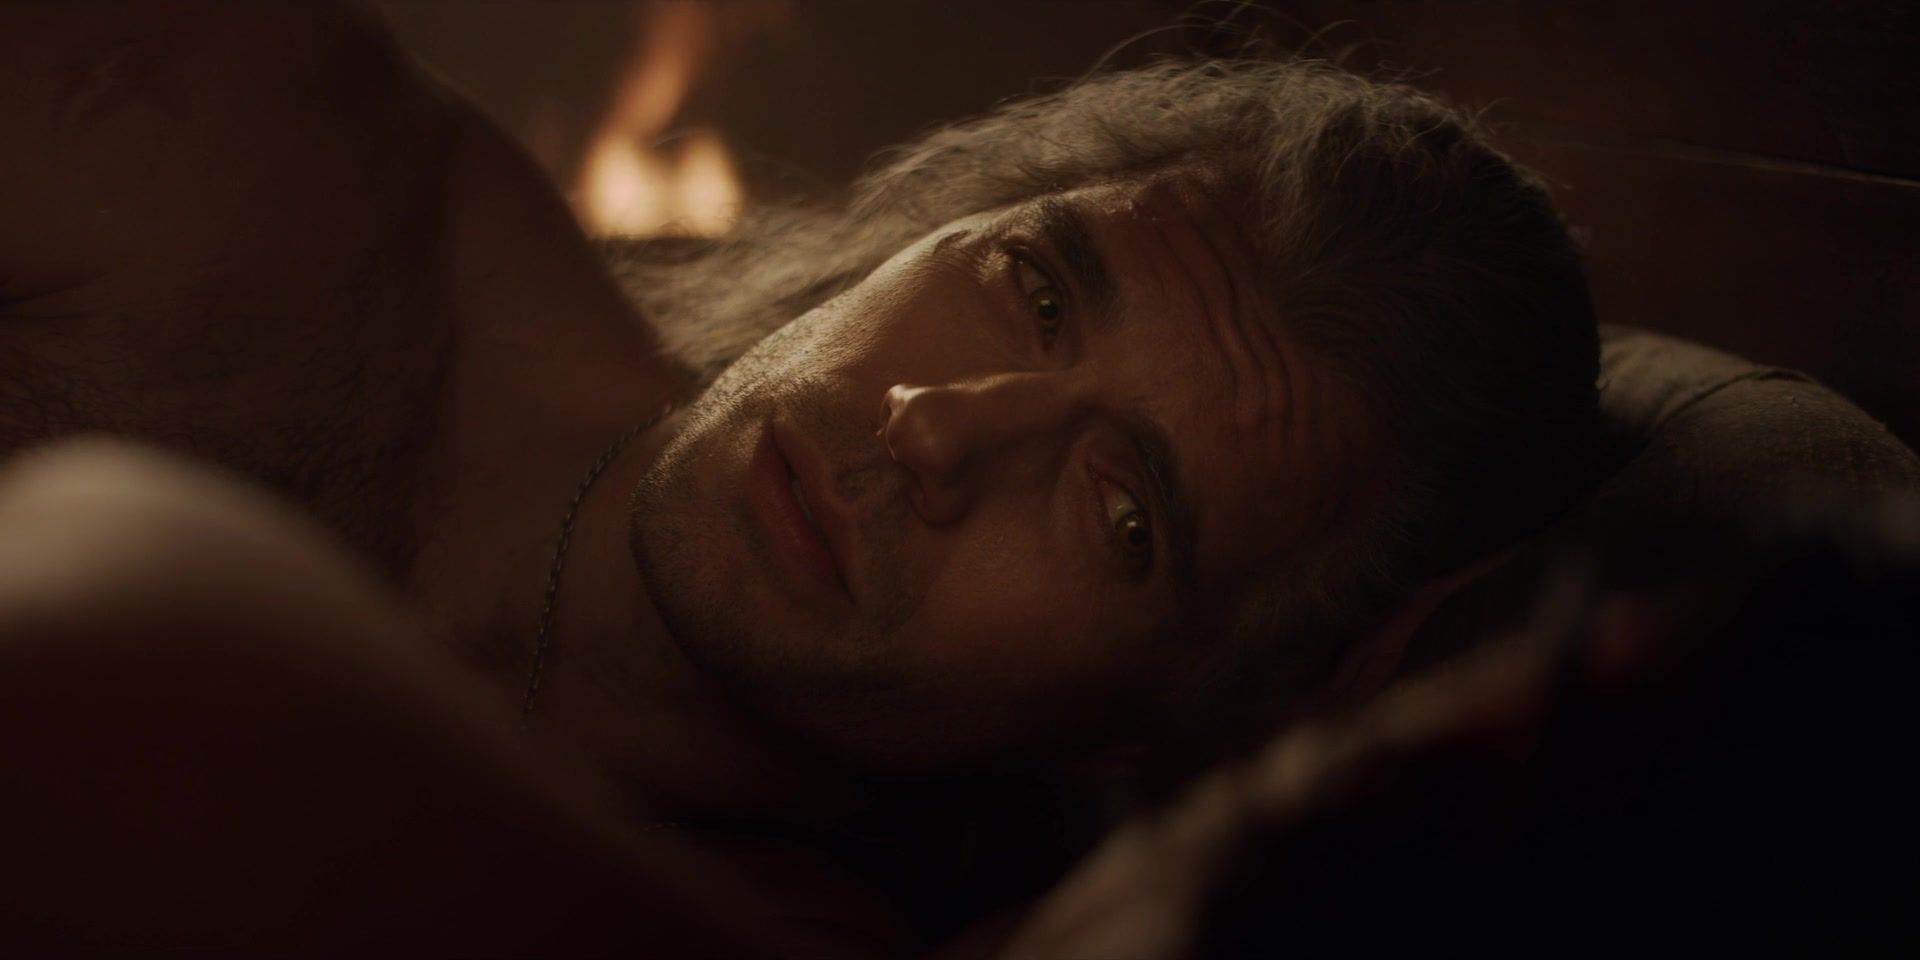 Uncut Nude Anya Chalotra, Jade Croot sexy - The Witcher s01e01-06 (2019) HollywoodGossip